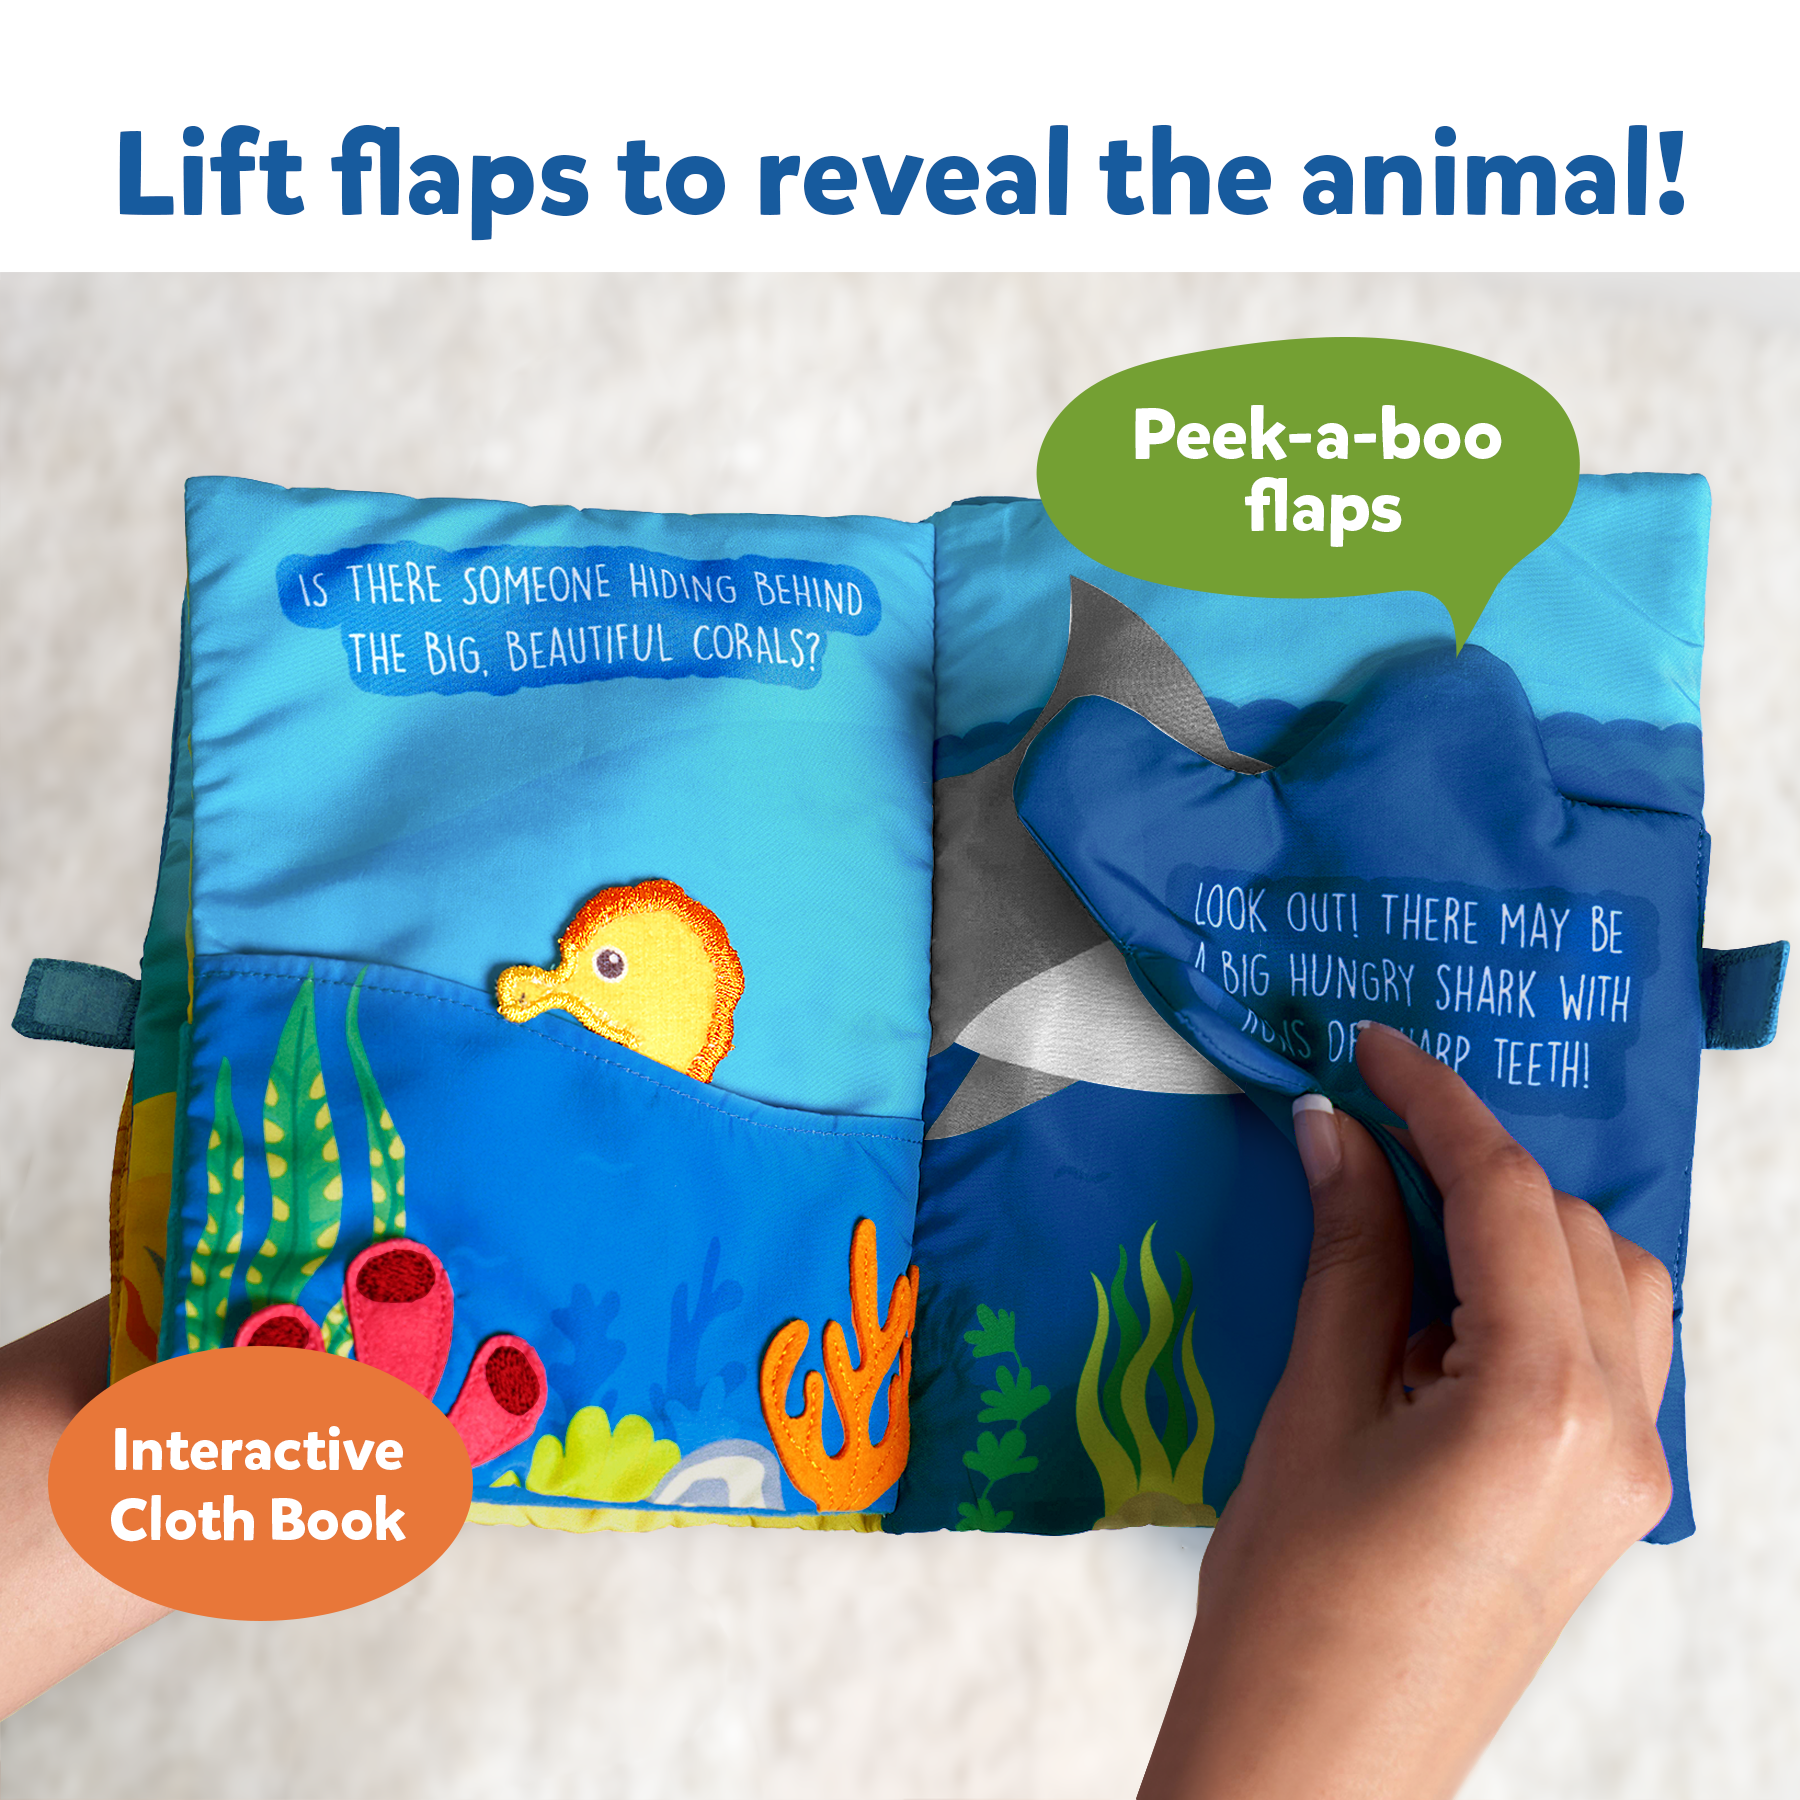 Skillmatics Baby Book - Peek-A-Boo I See You Underwater Animal Theme, Interactive Soft Cloth Book With Crinkle Pages, Ages 6 Months And Up